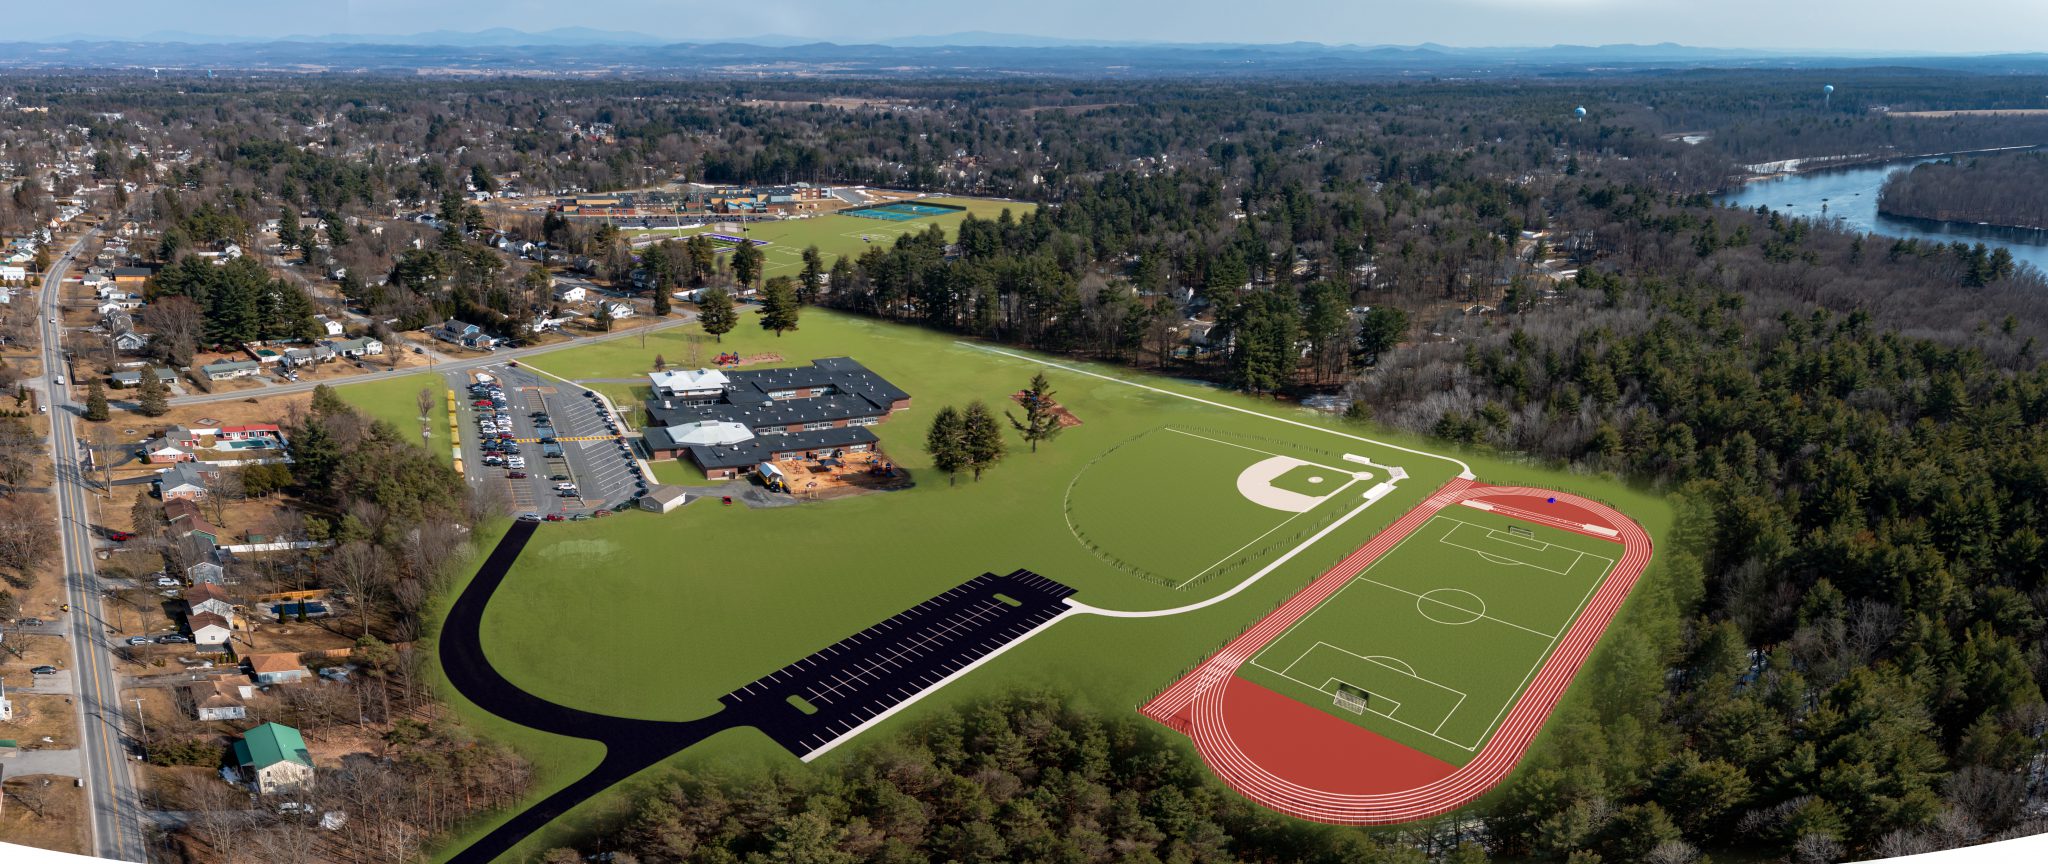 Rendering of the changes to Tanglewood fields.